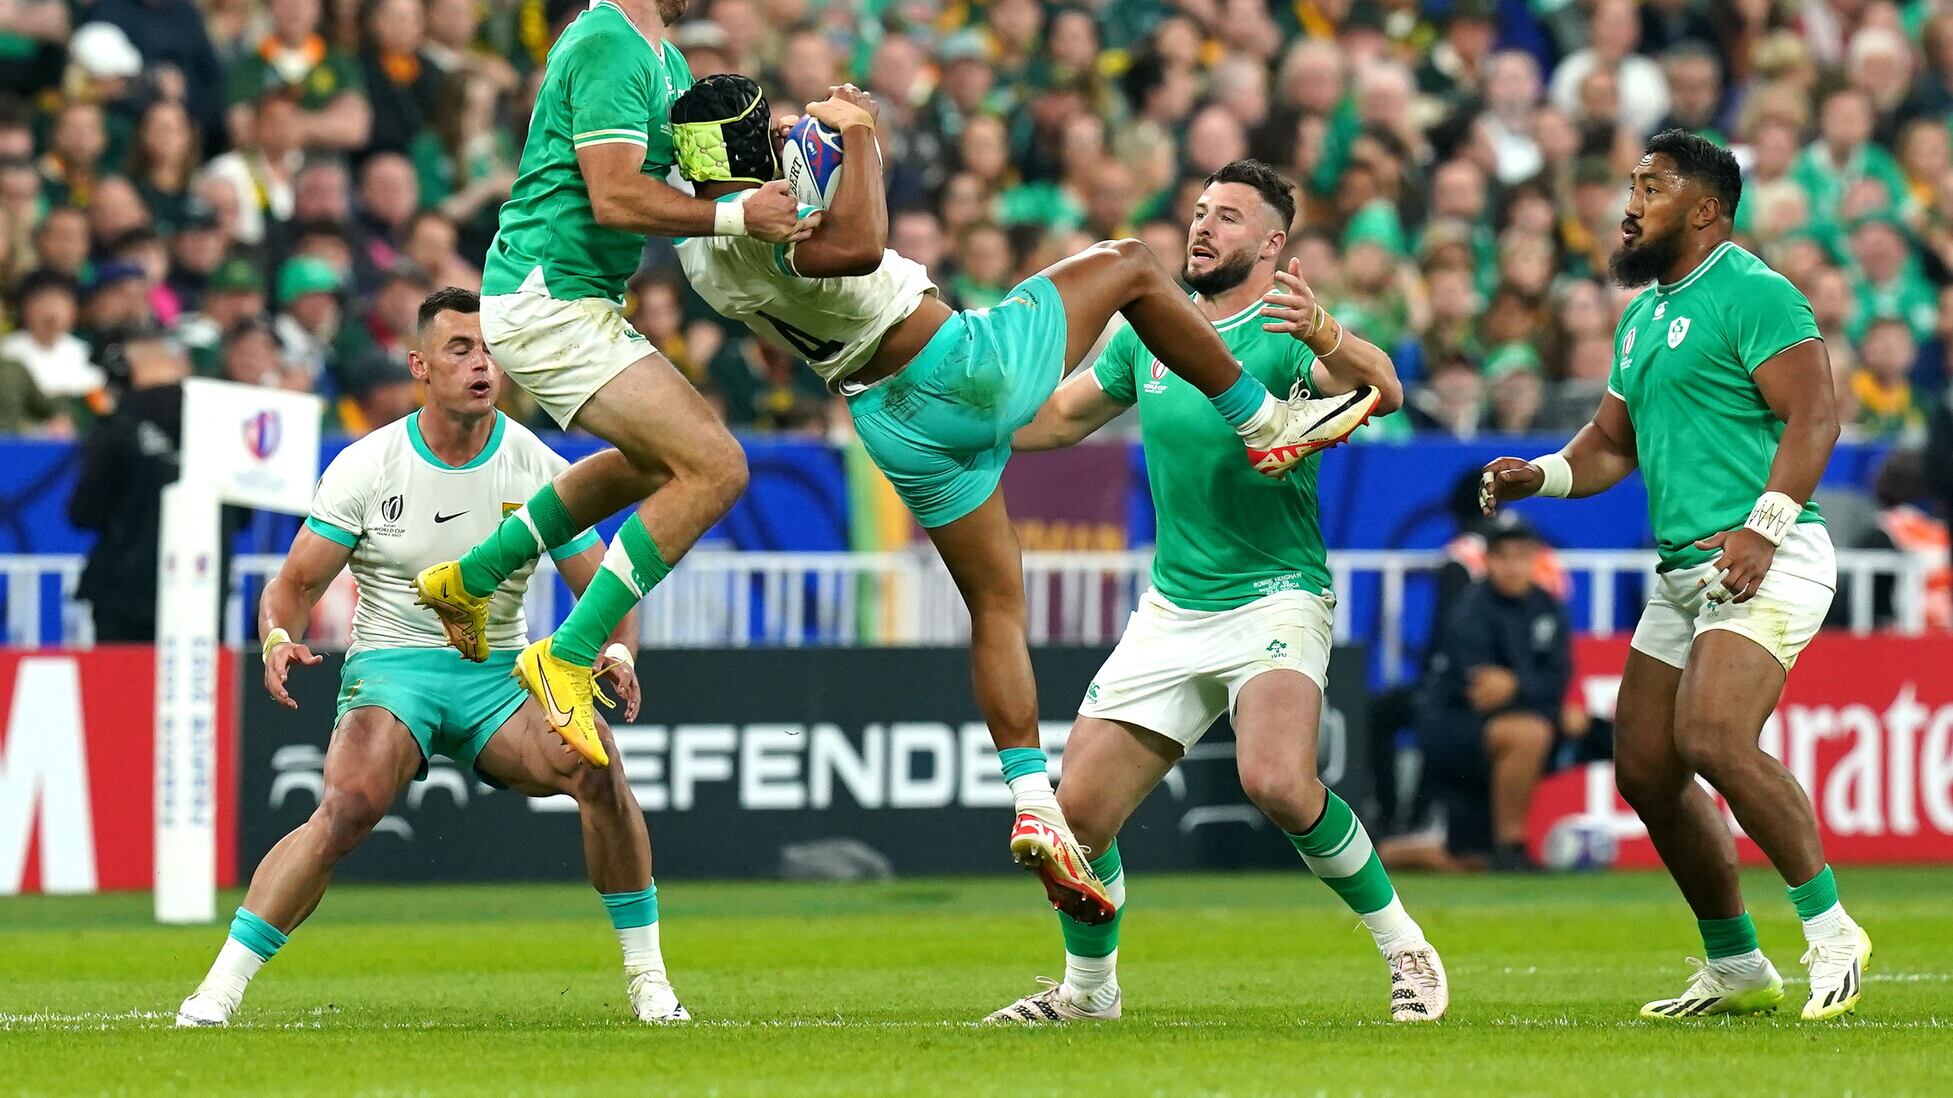 South Africa's Kurt-Lee Arendse claims the ball with pressure from Ireland's Hugo Keenan during the Rugby World Cup 2023, Pool B match at the Stade de France in Paris